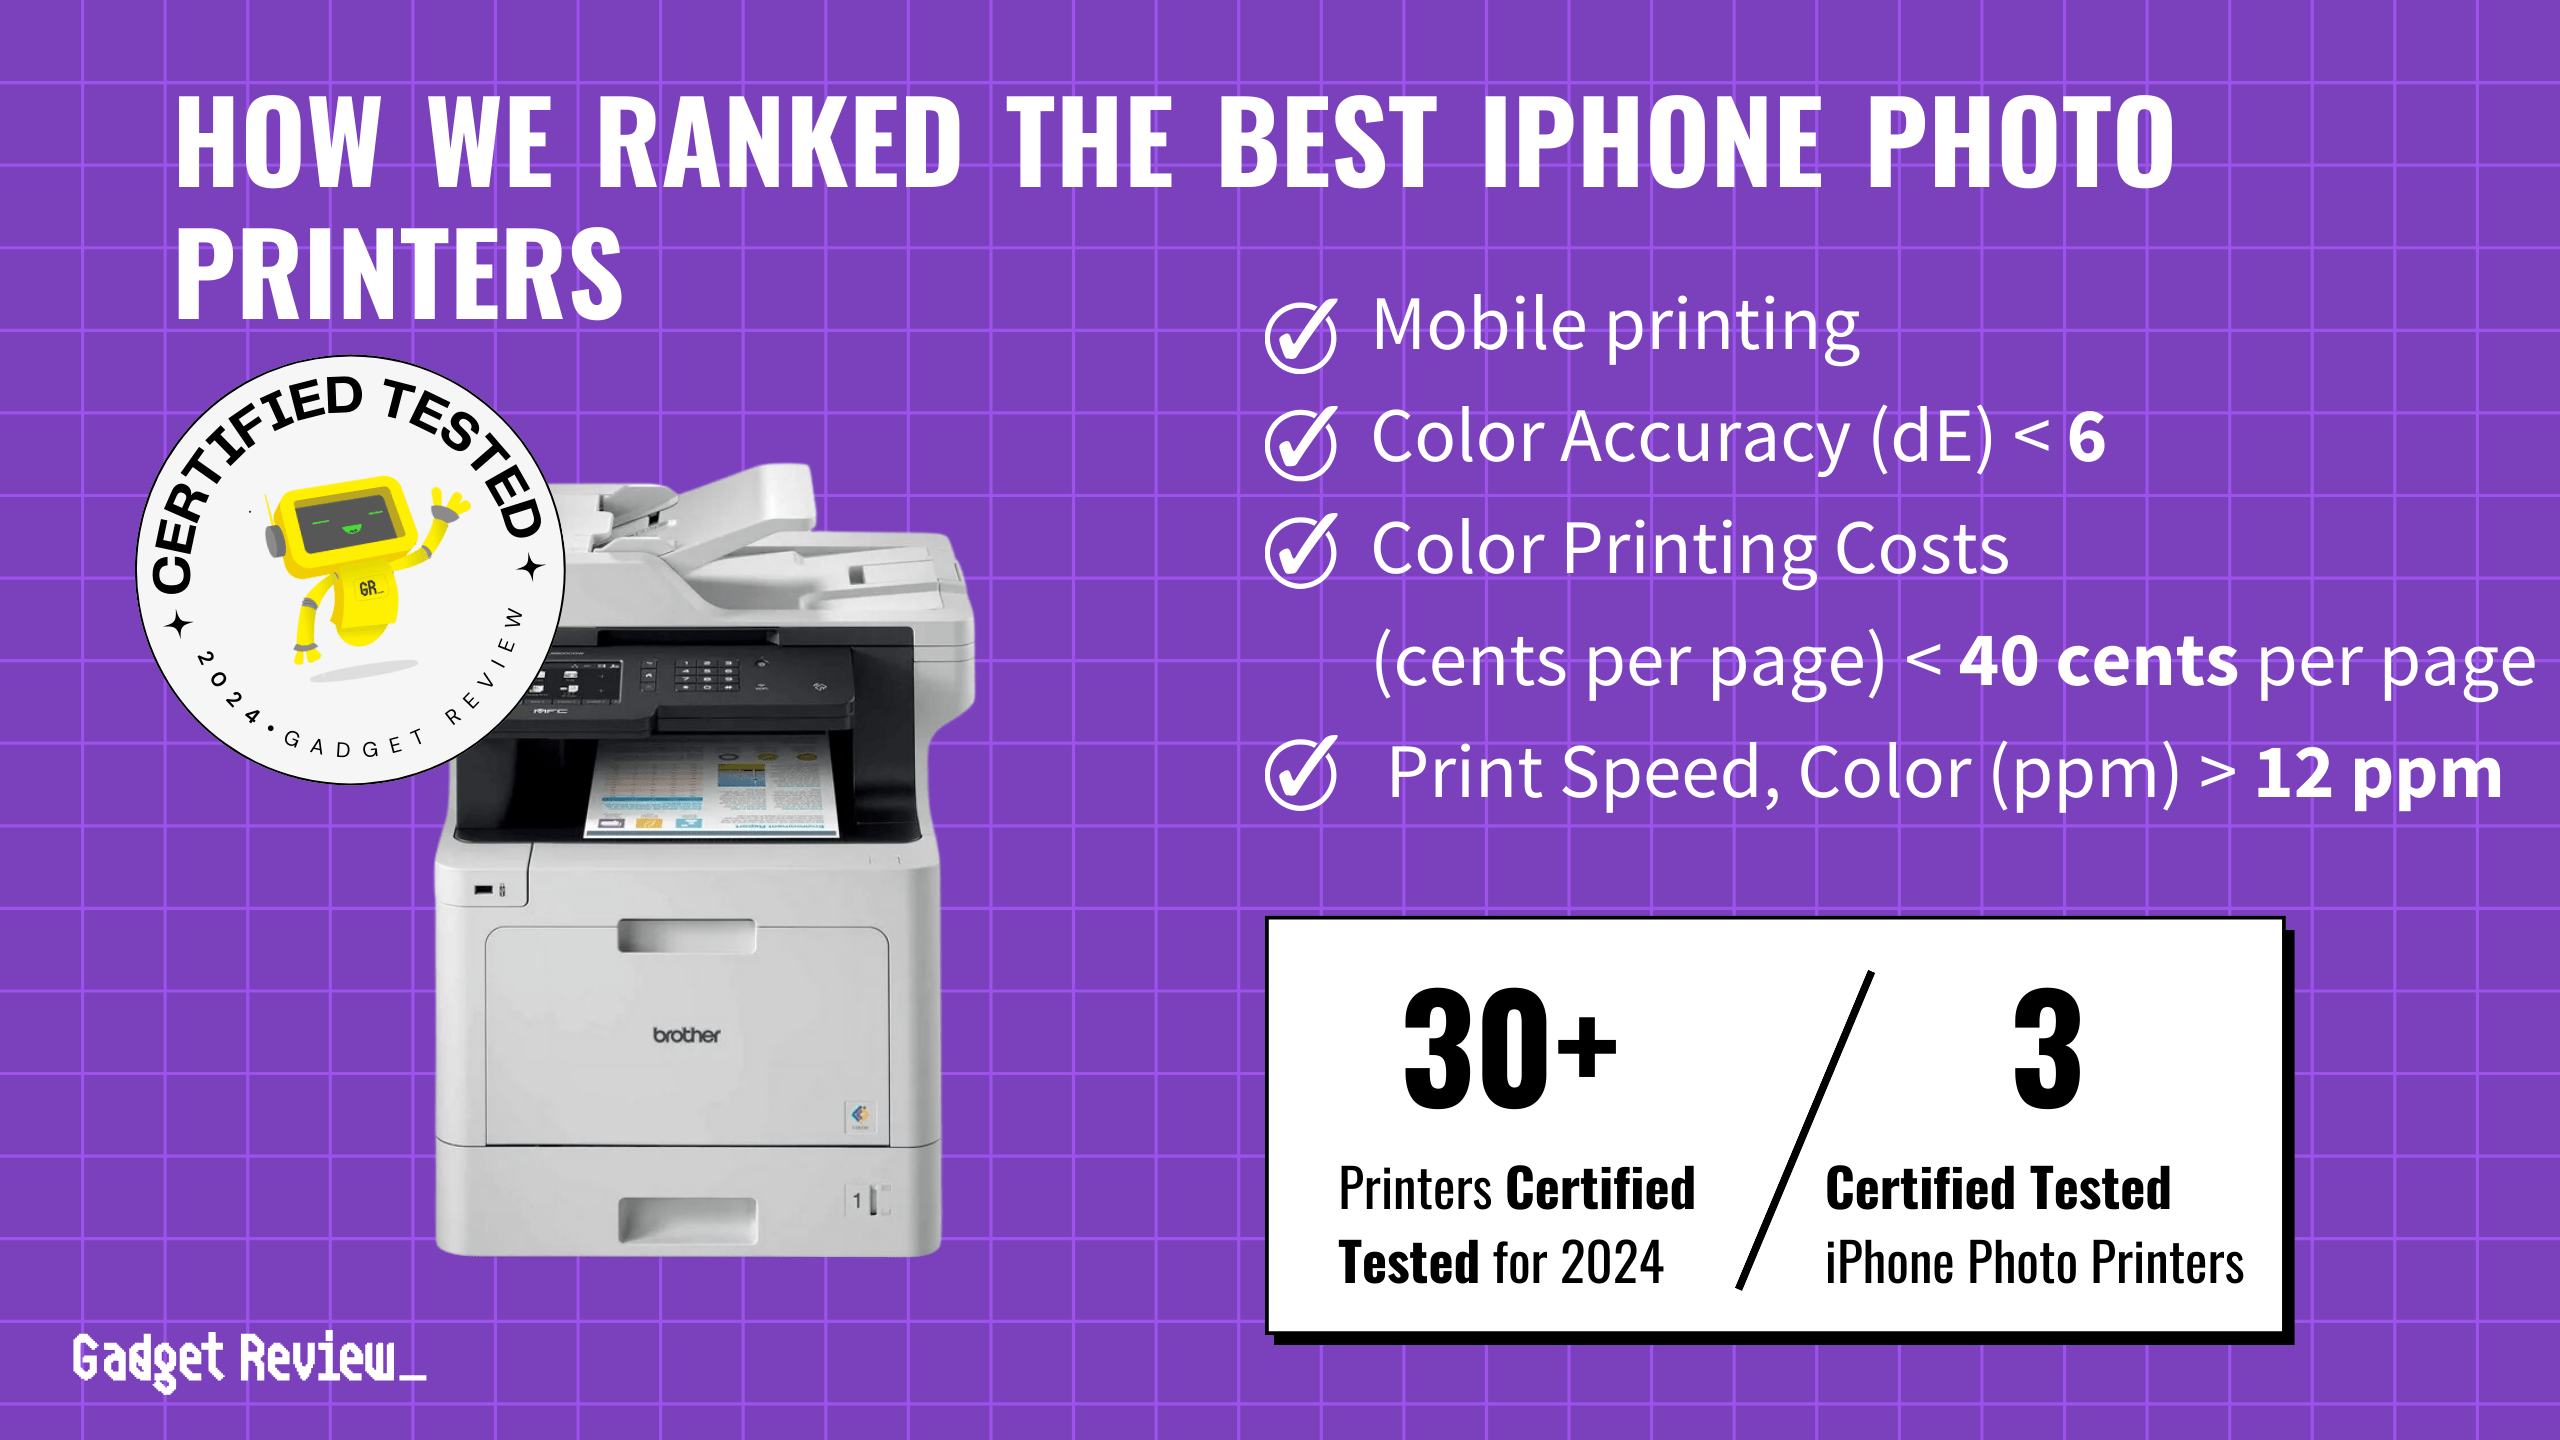 We Ranked the 3 Best Photo Printers for iPhone